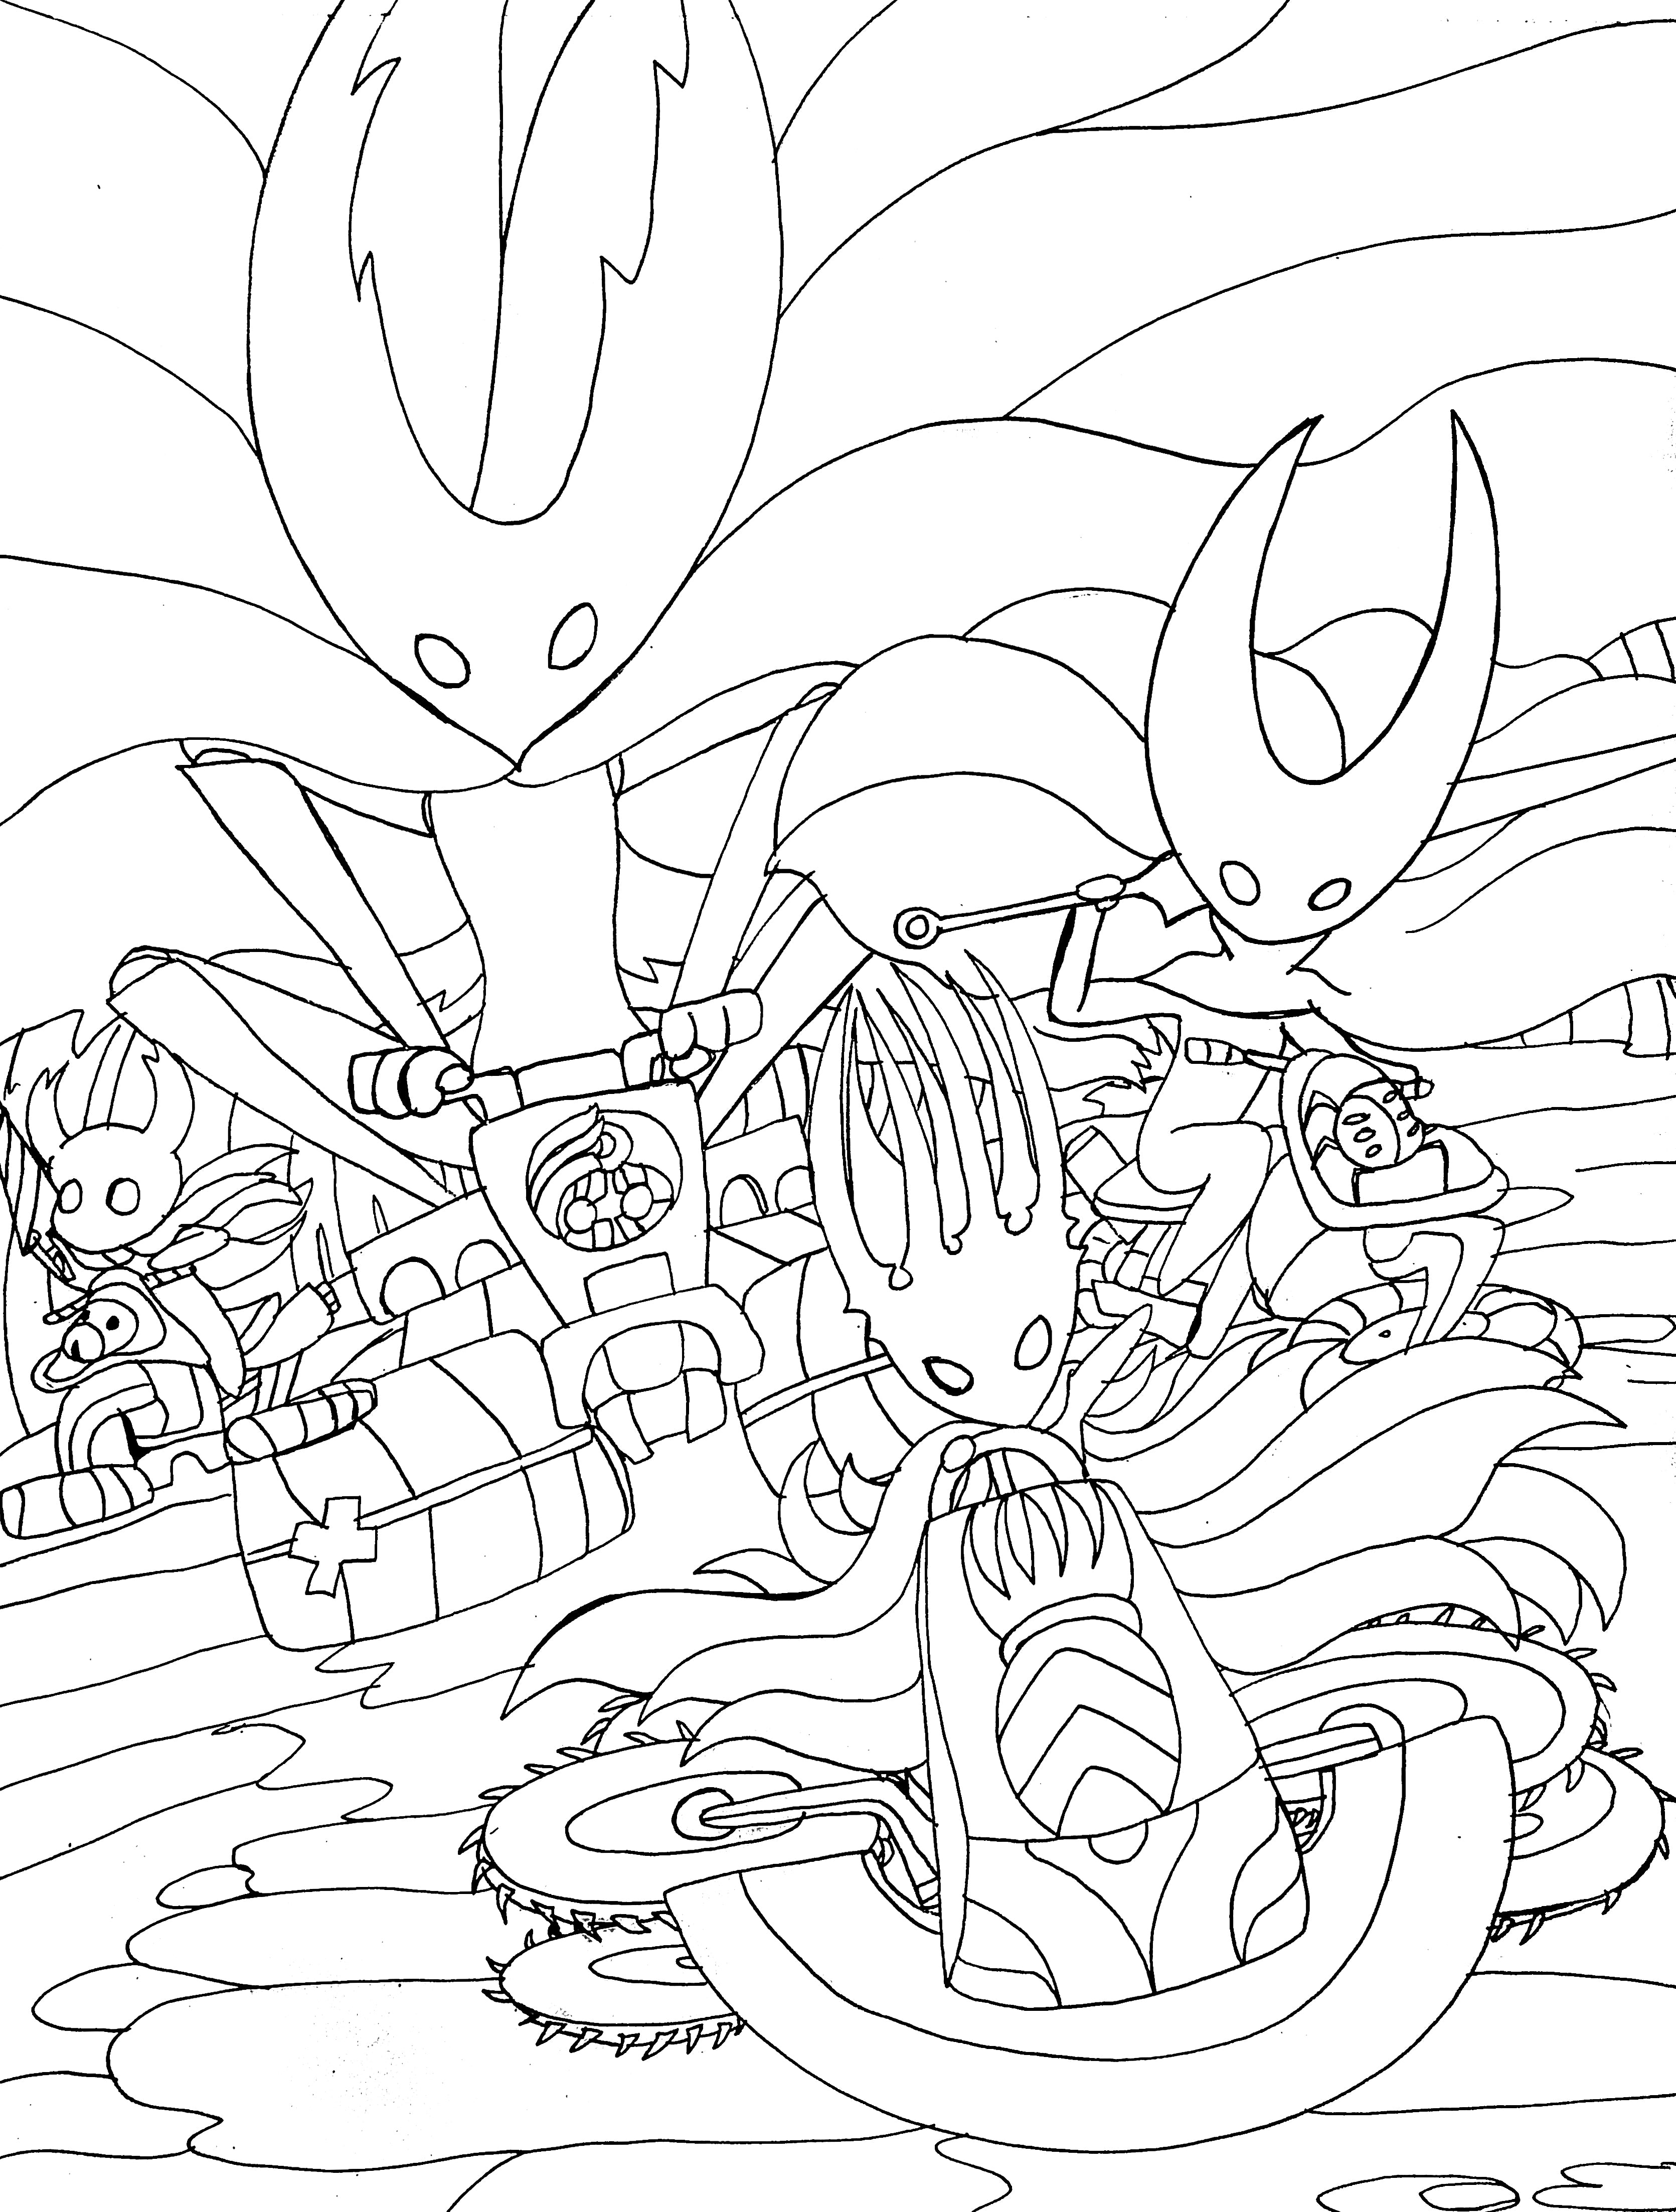 hollow knight lineart, anime lineart, game drawing